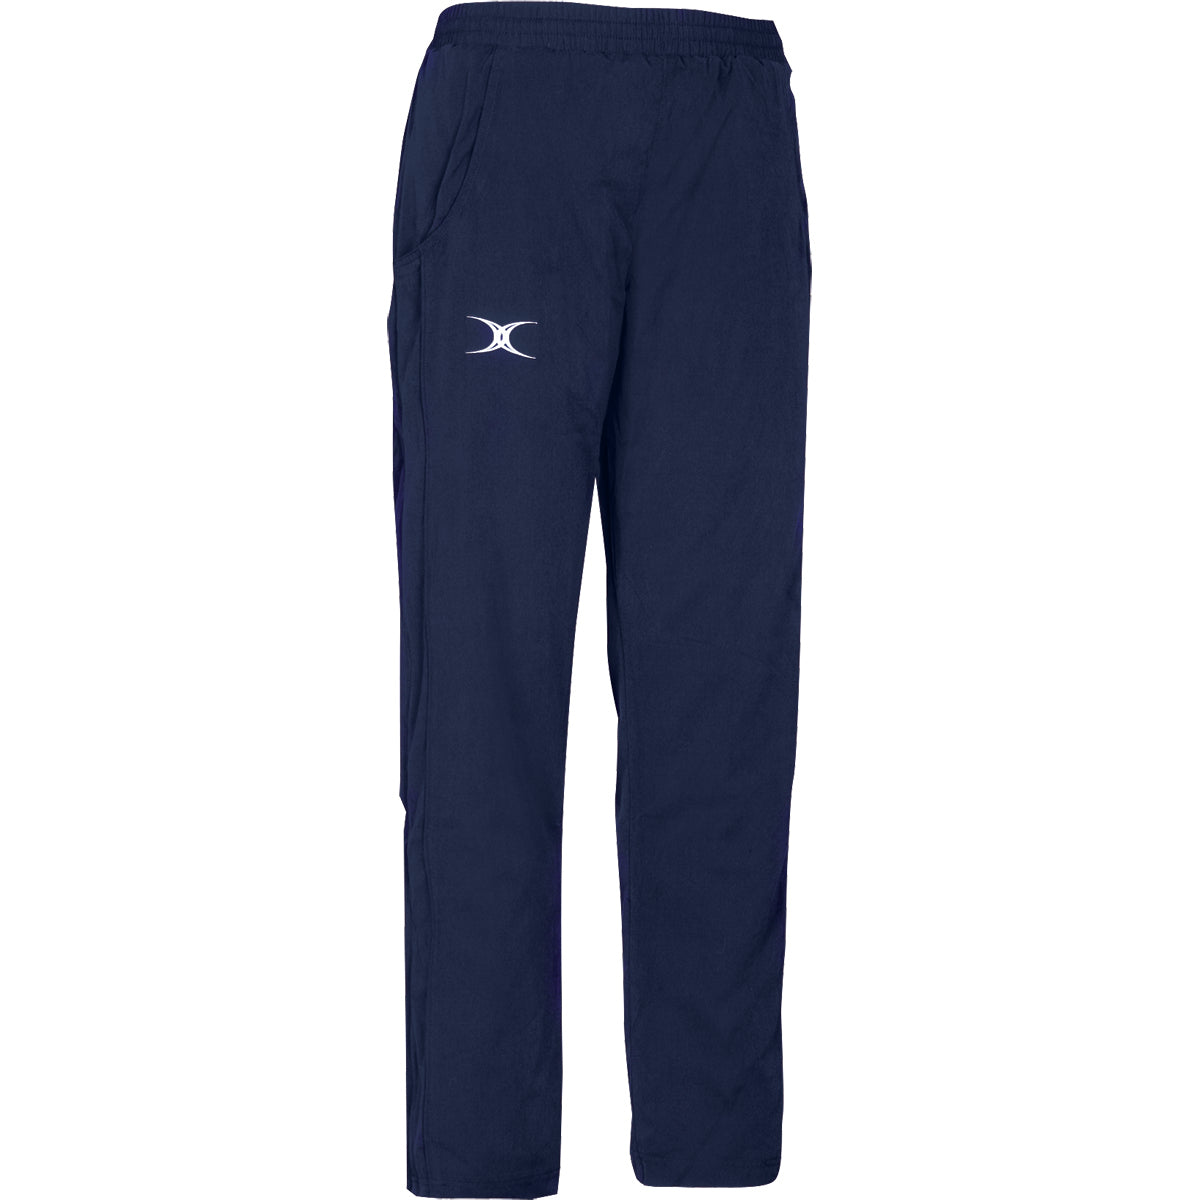 Women's Synergie Trousers